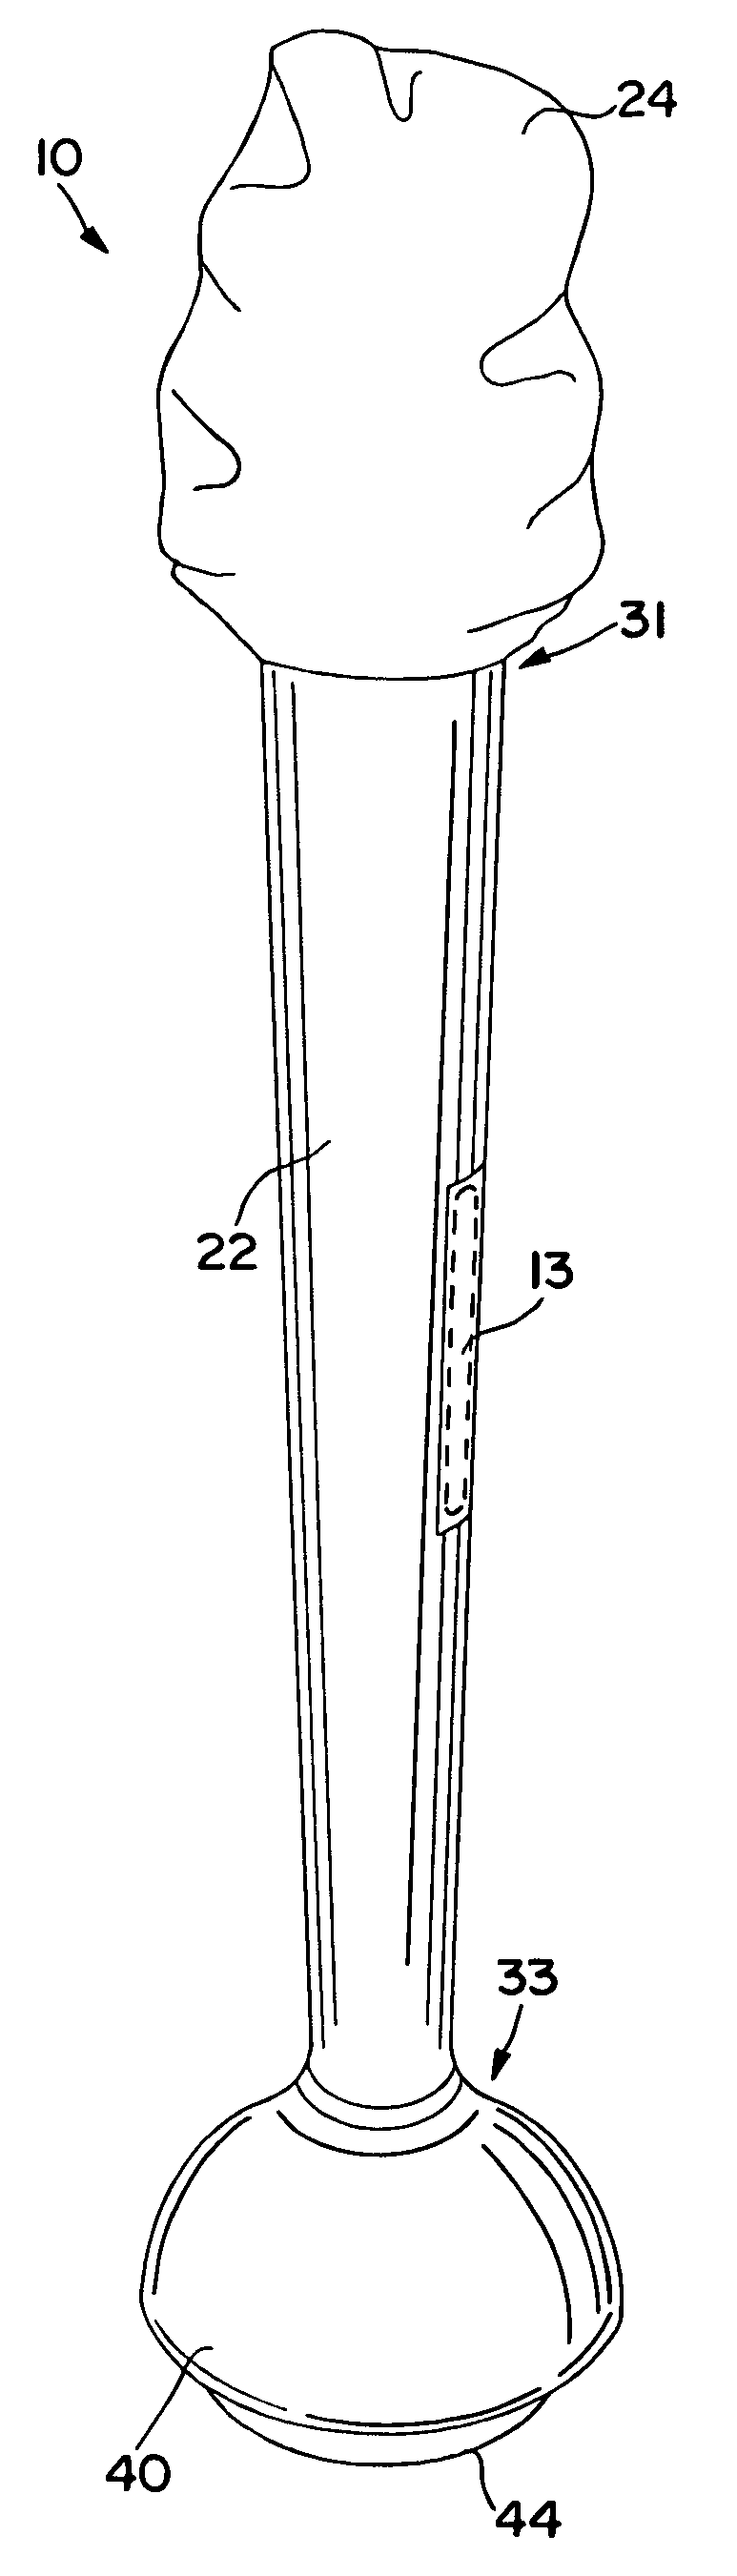 Self-contained swab-based diagnostic systems